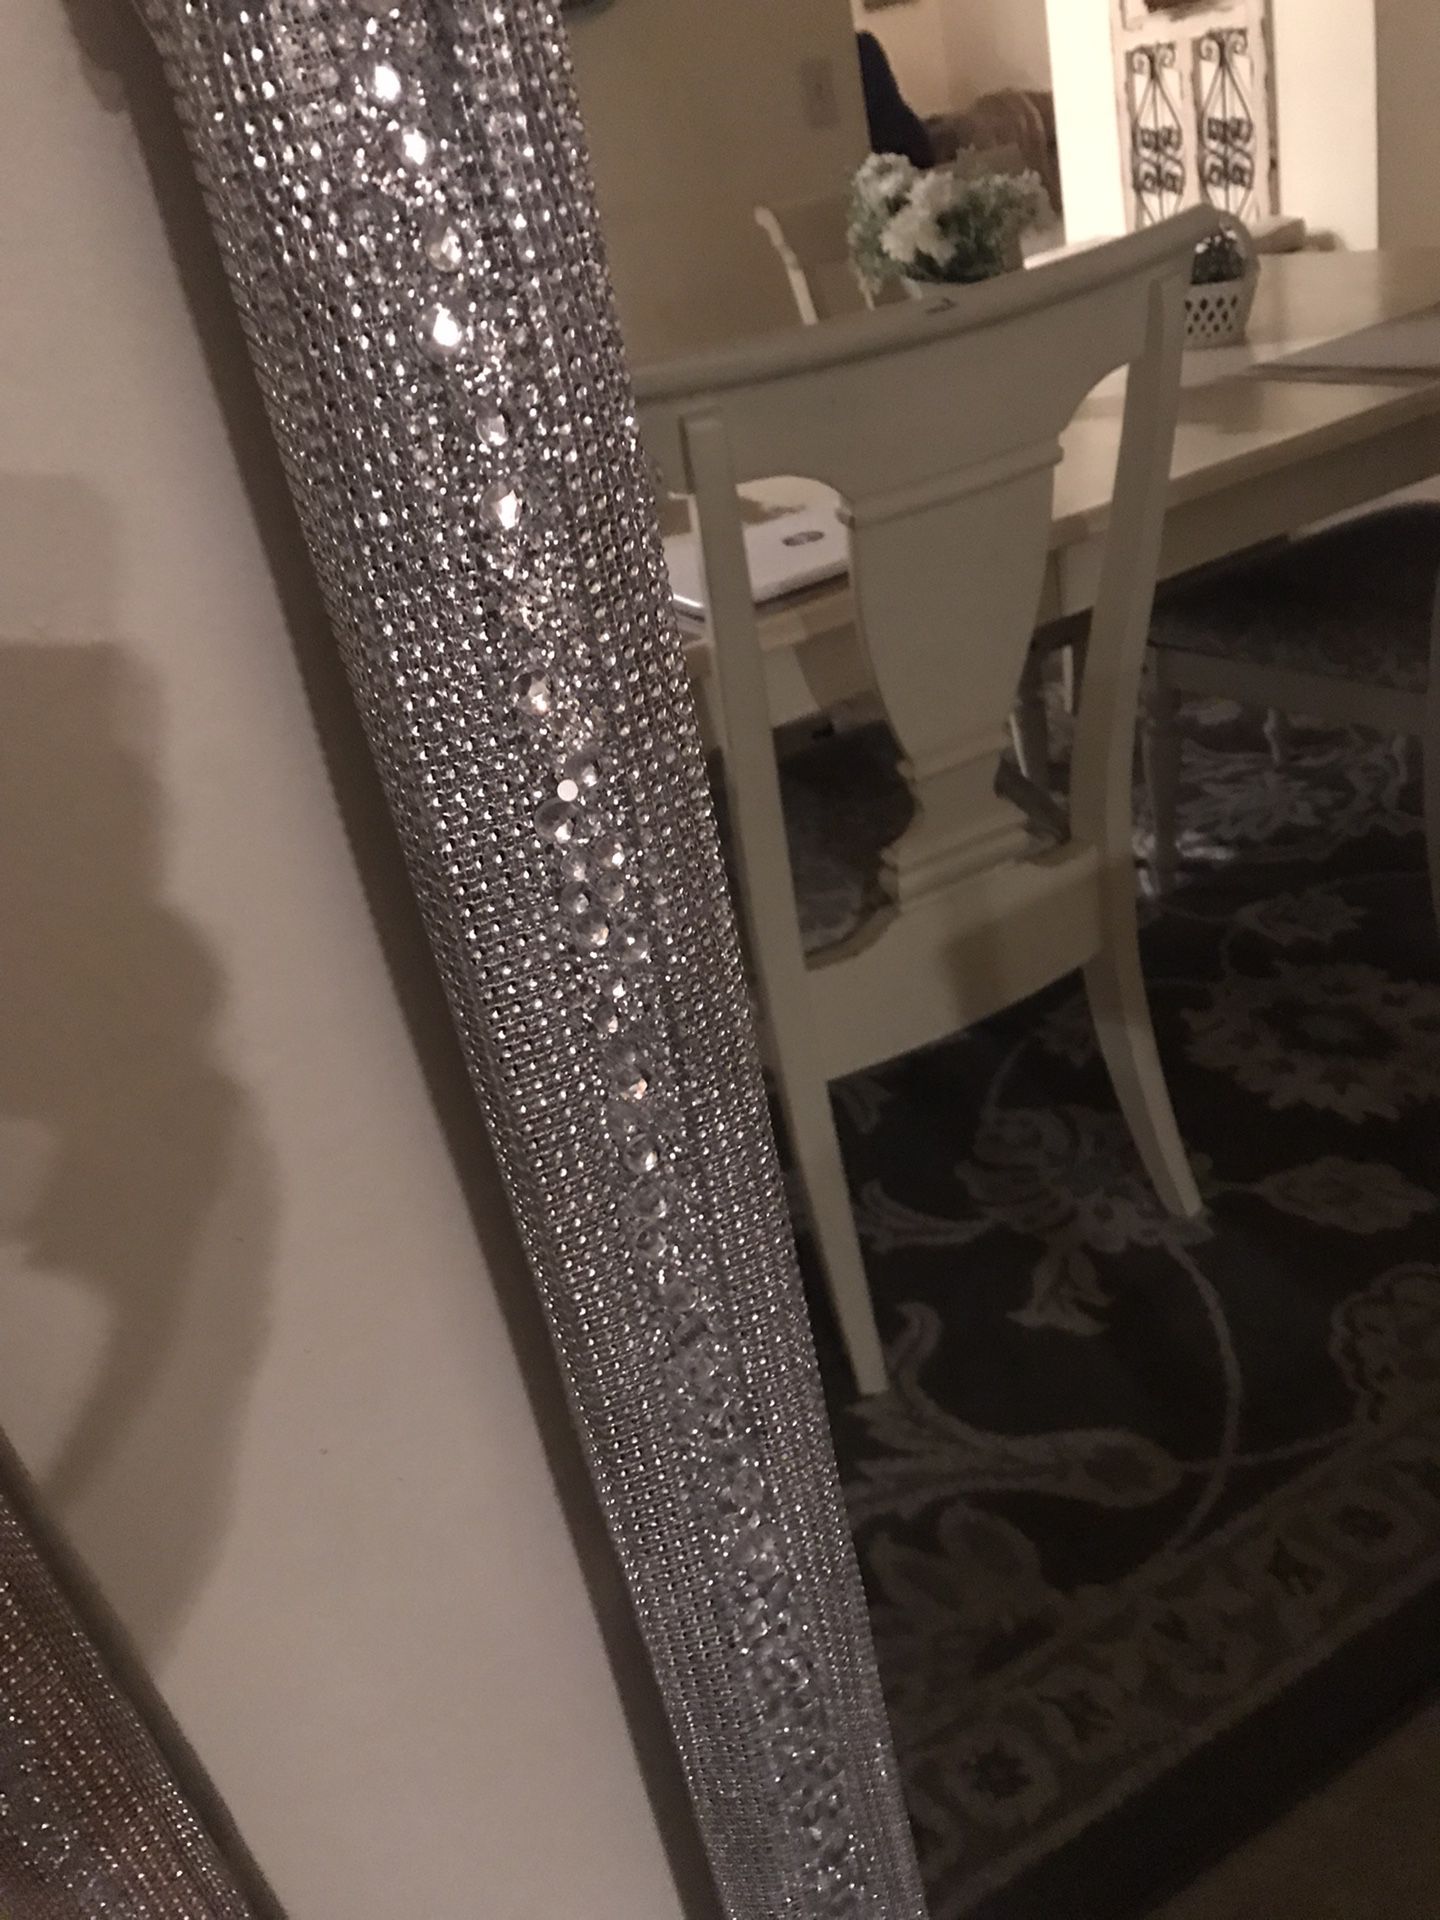 Gorgeous silver bling Hollywood glam mirror